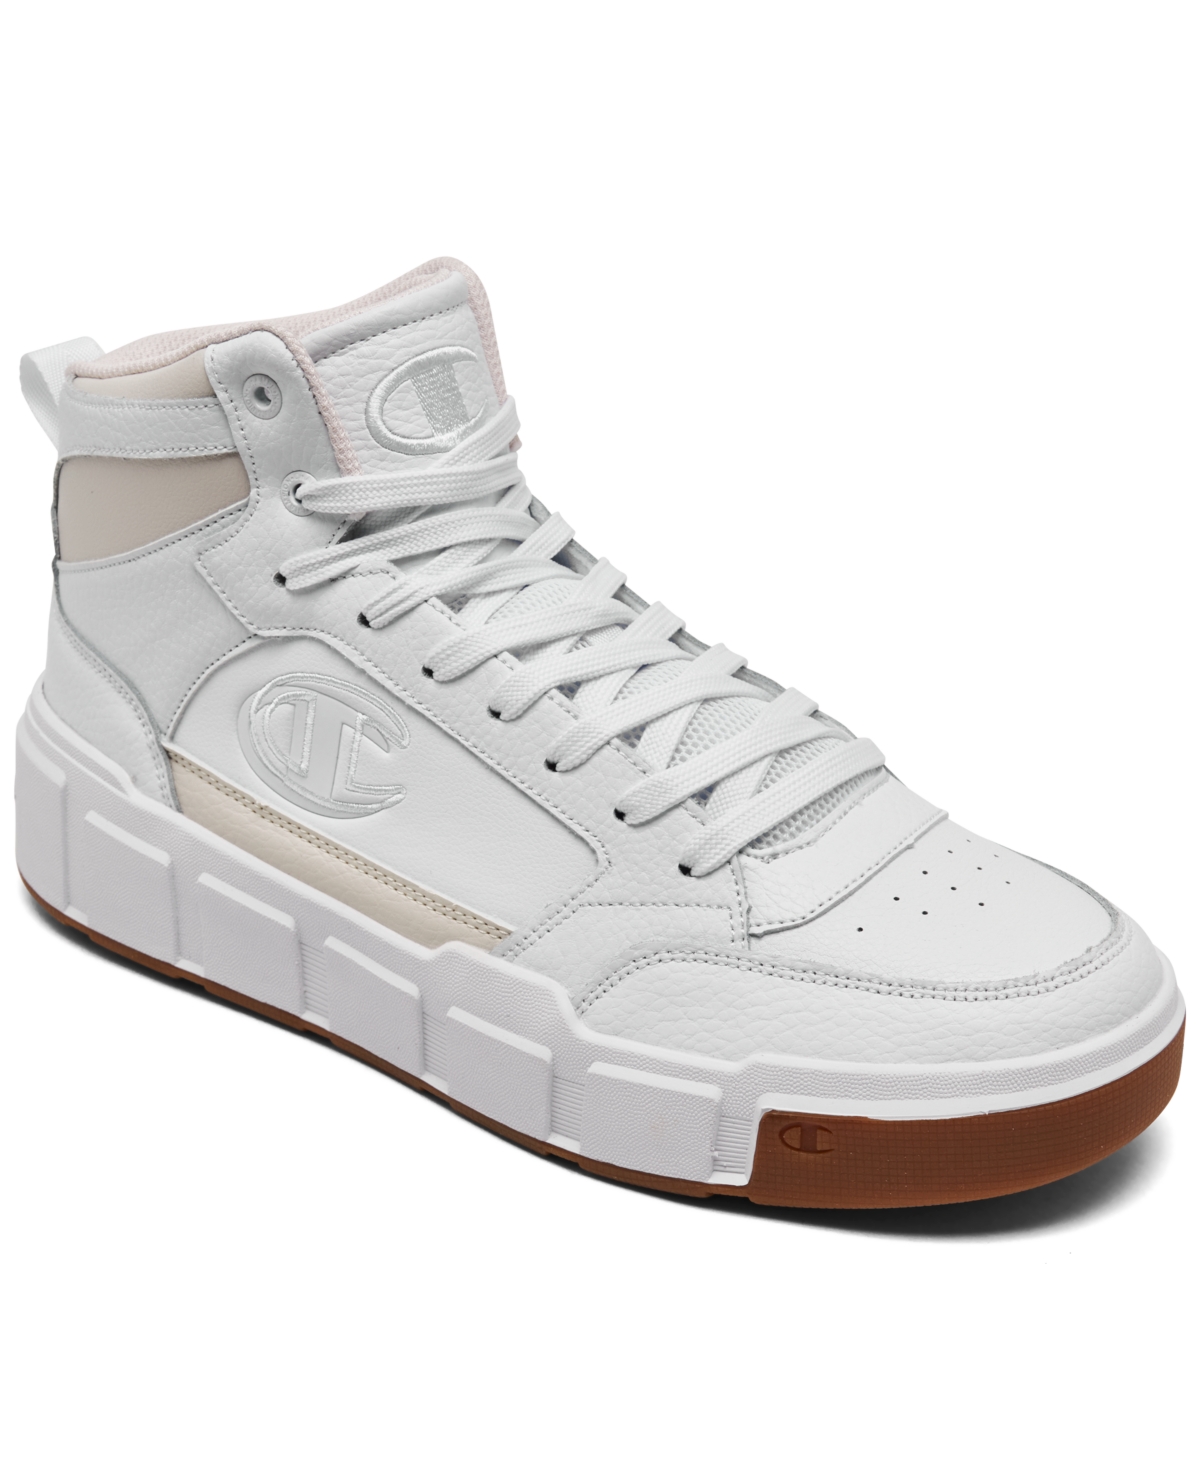 Champion Men's Drome Ventor Hi Casual Sneakers From Finish Line In White/beige/gum